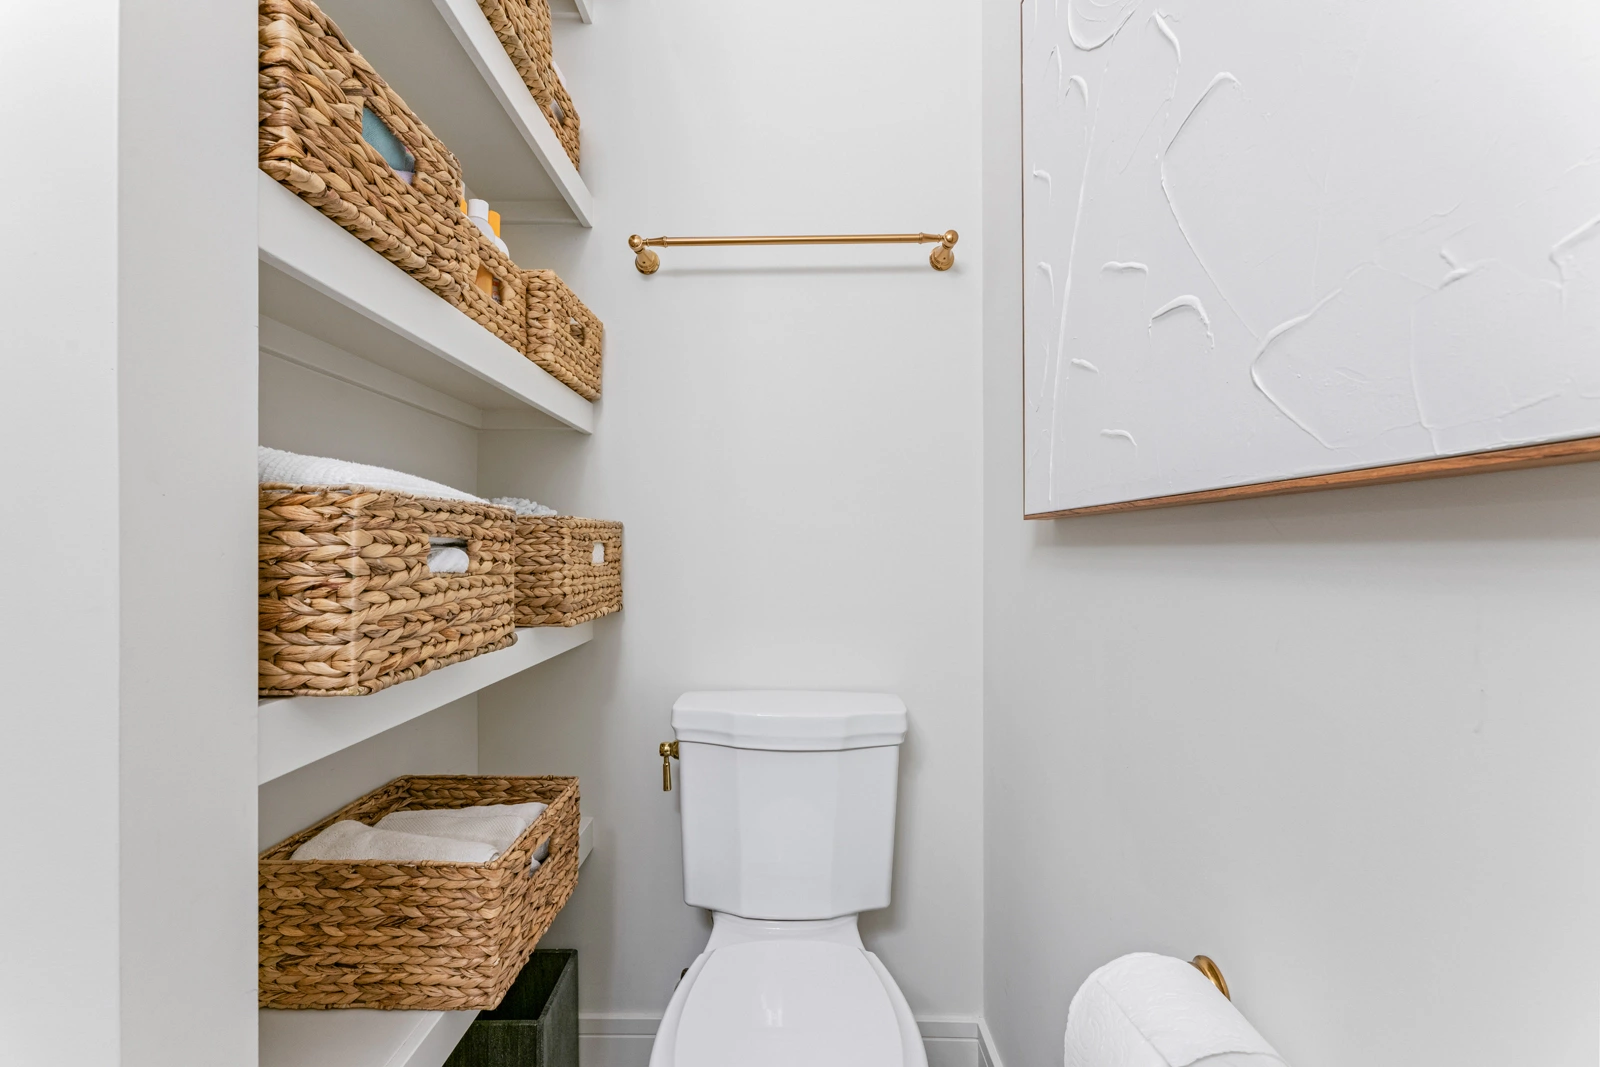 built in storage shelves and toilet